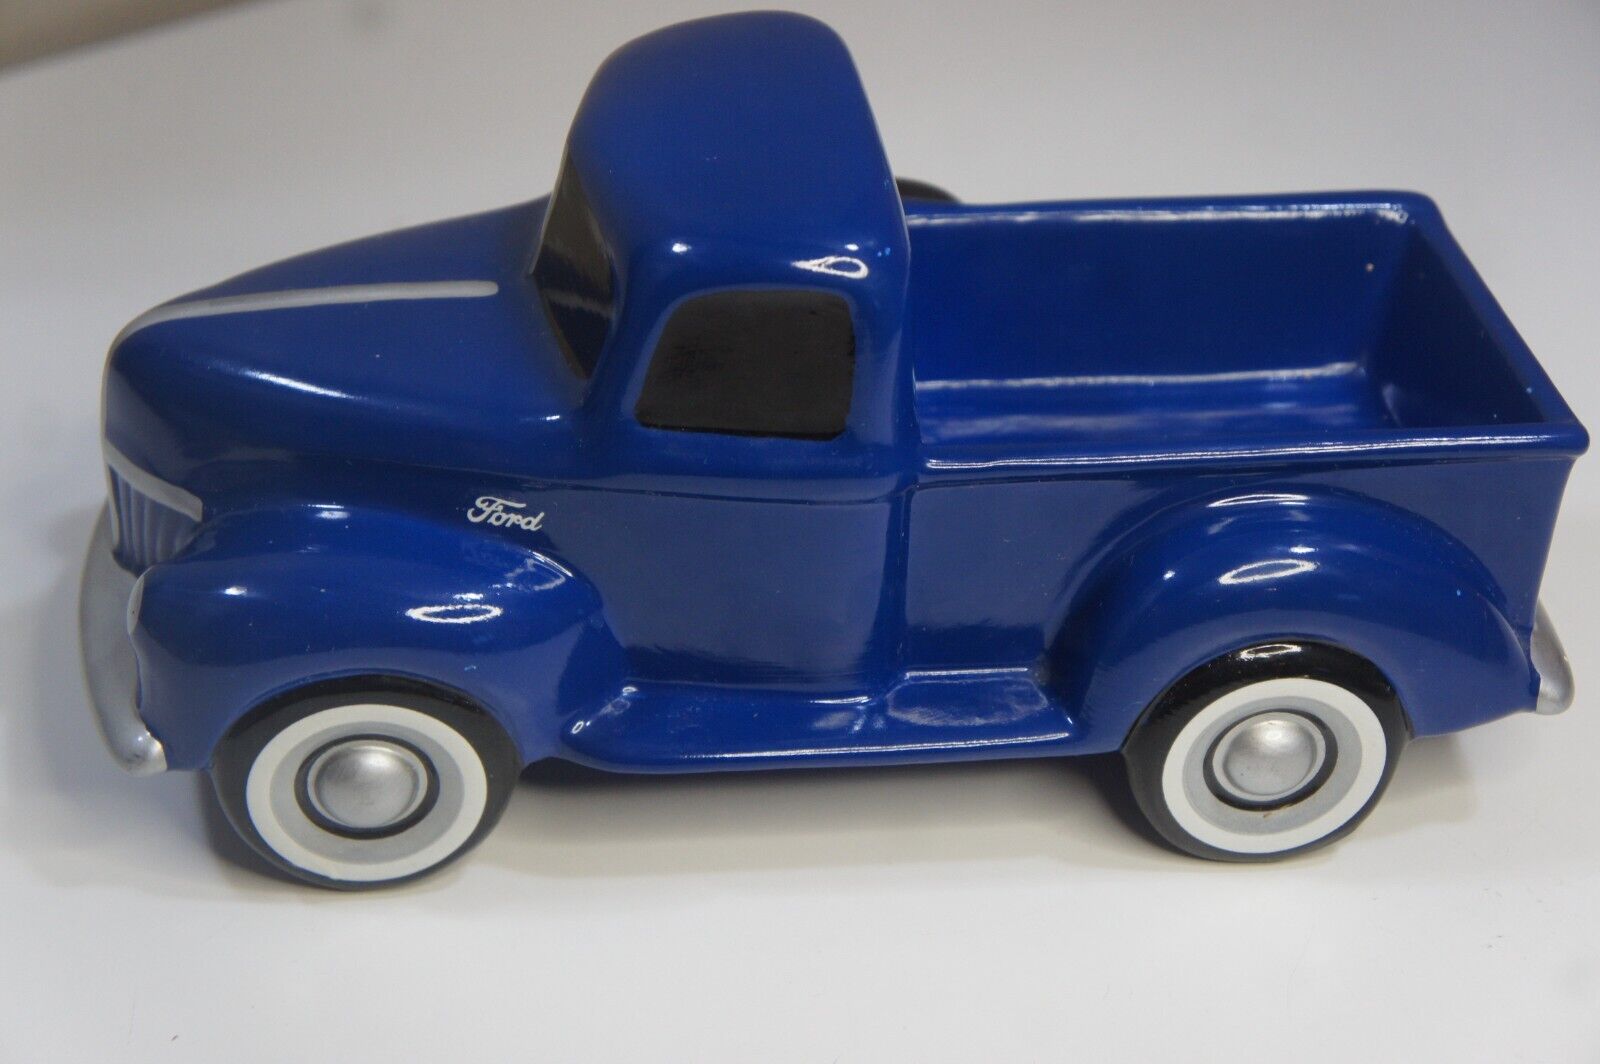 Ford 1948 F-1 Pick-up Truck Blue Ceramic Teleflora Ford Motor Company 10x5 in